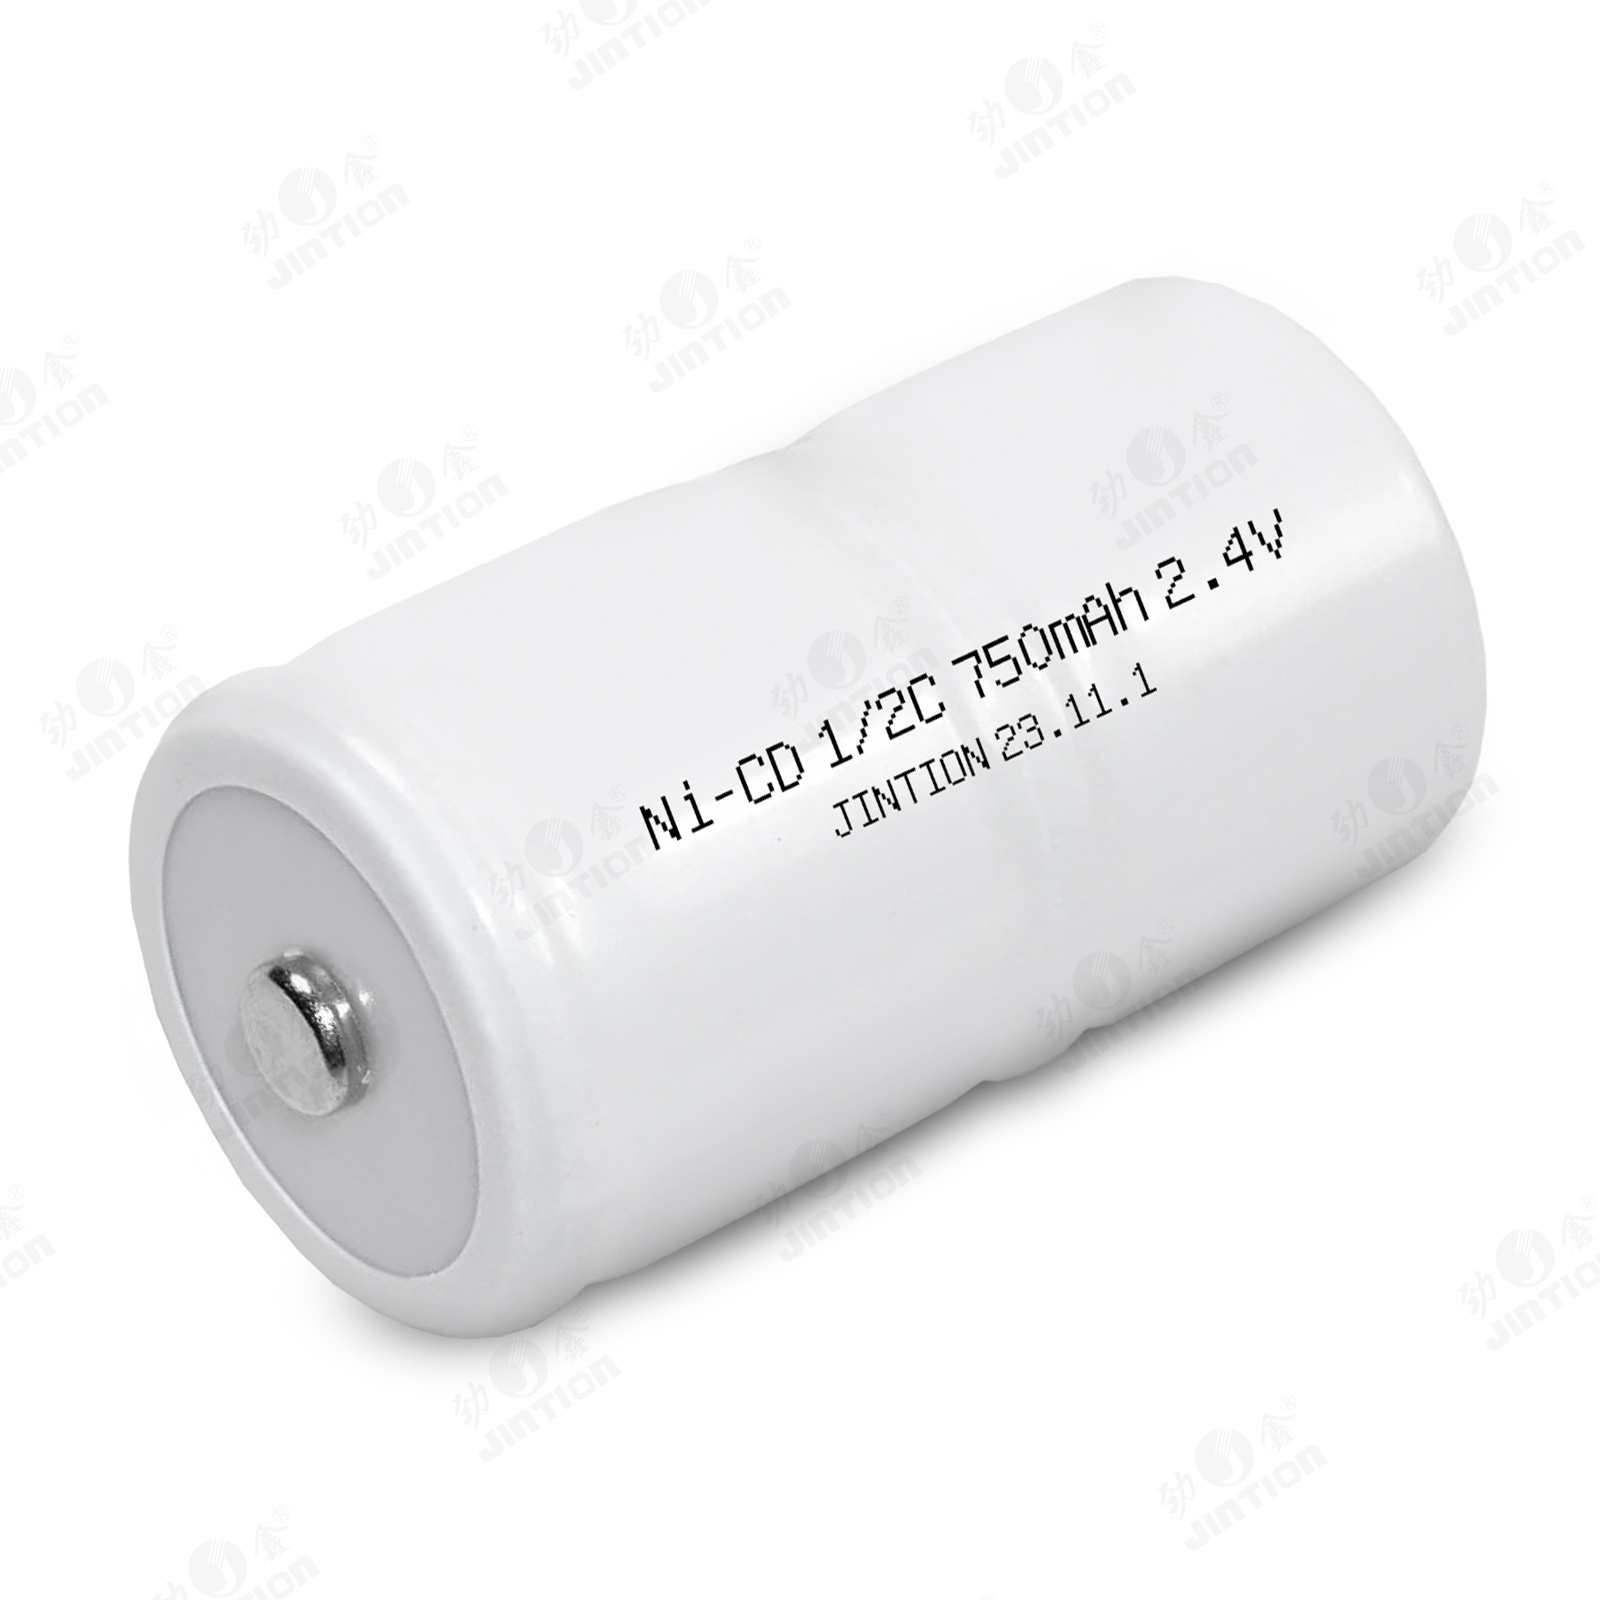 JINTION NICD 1/2C 750MAH 2.4V nicd battery pack 2.4v nickel cadmium batteries nicd for Gas Detector 8806 8806A 8850 8900-A